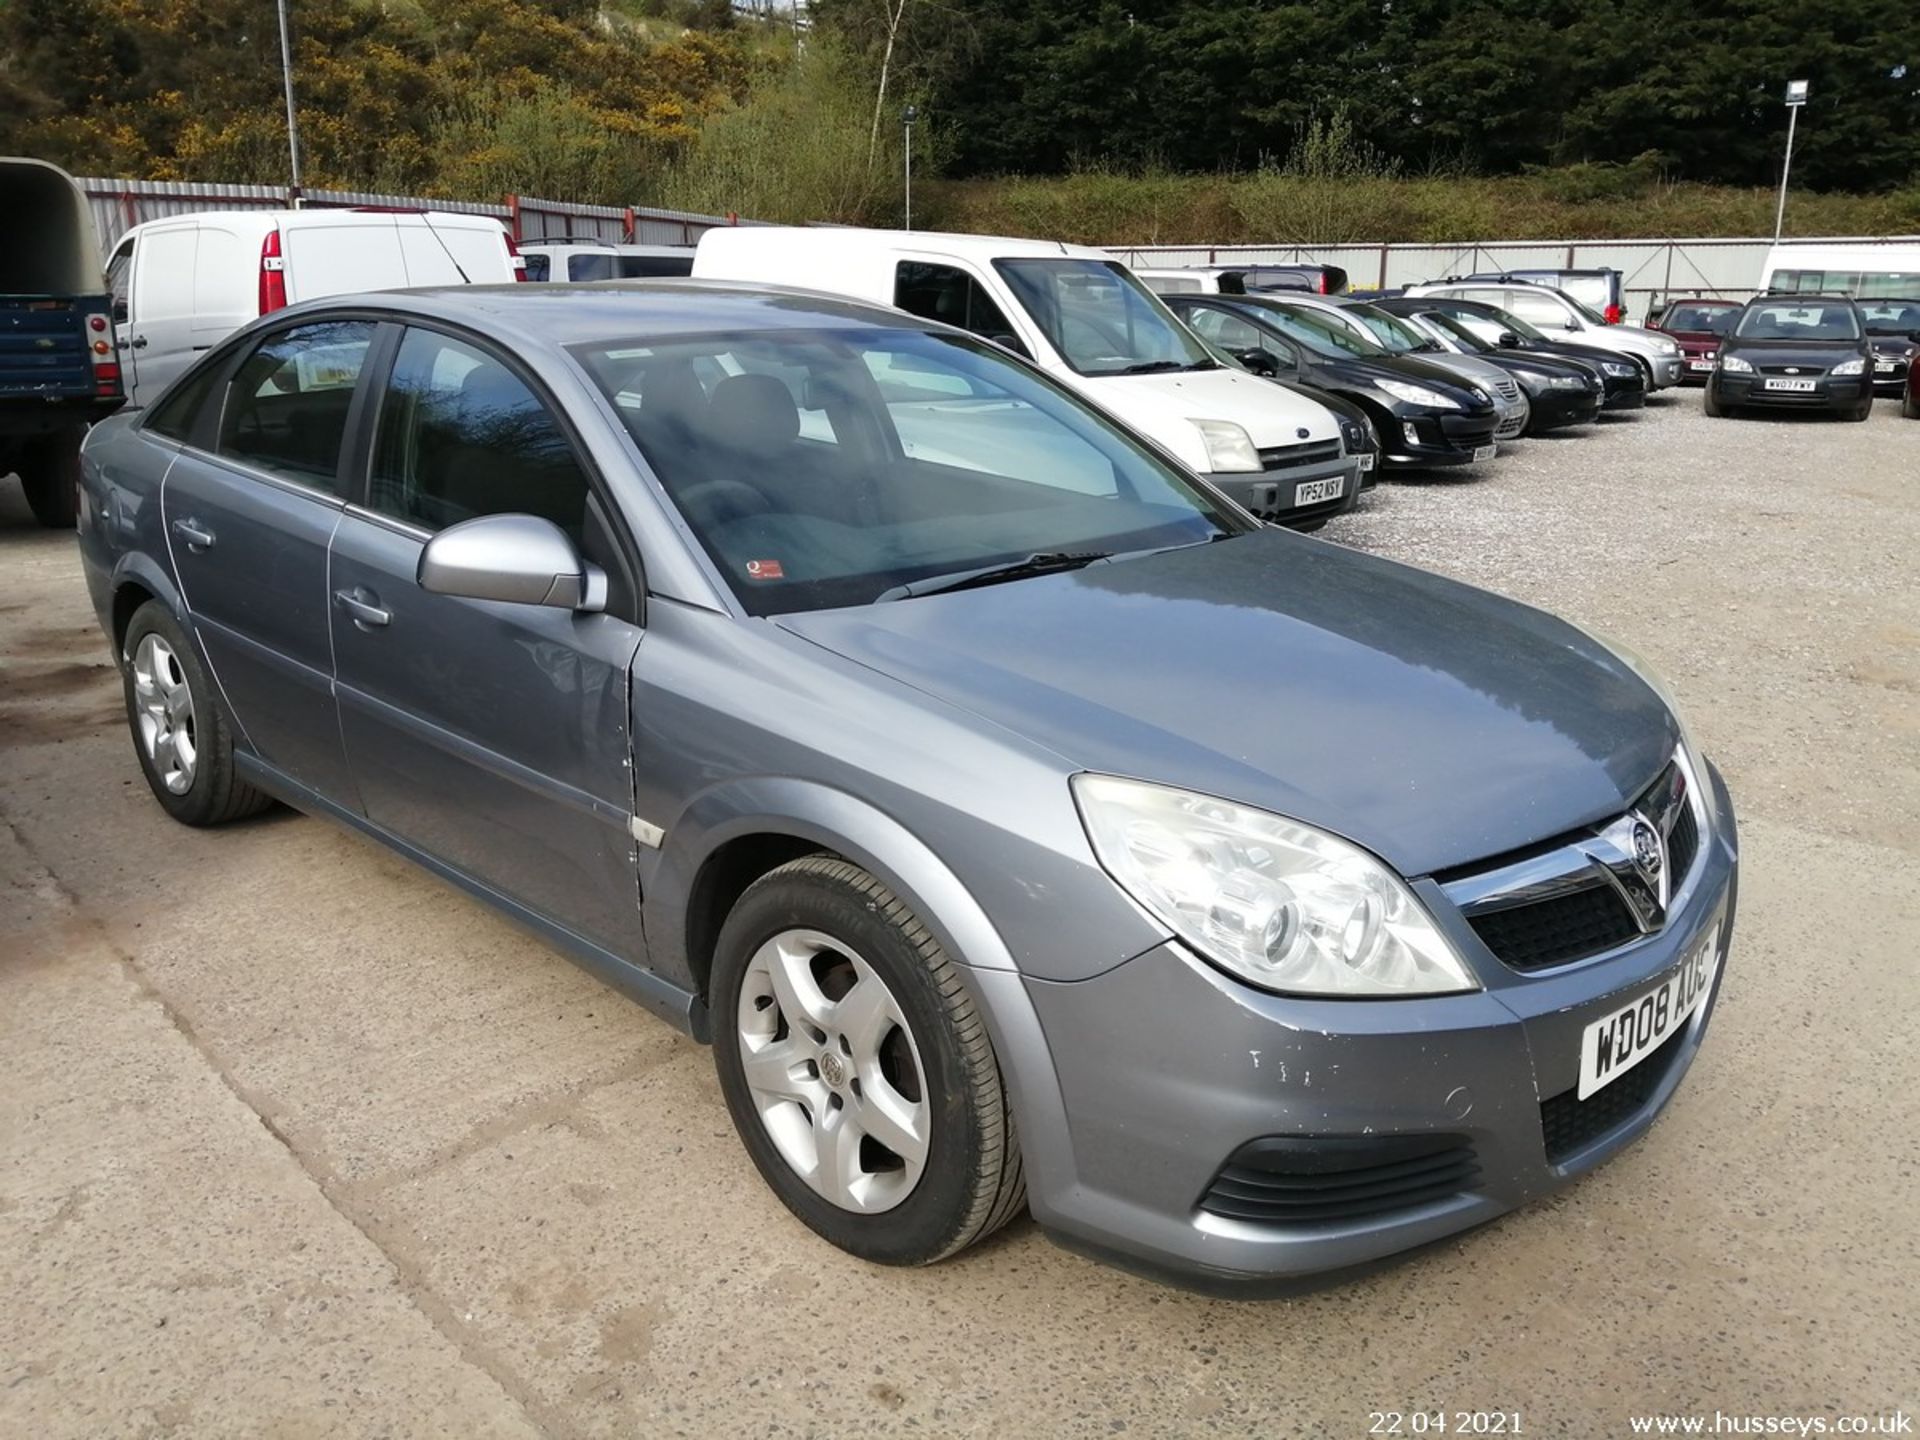 08/08 VAUXHALL VECTRA EXCLUSIV - 1796cc 5dr Hatchback (Silver)